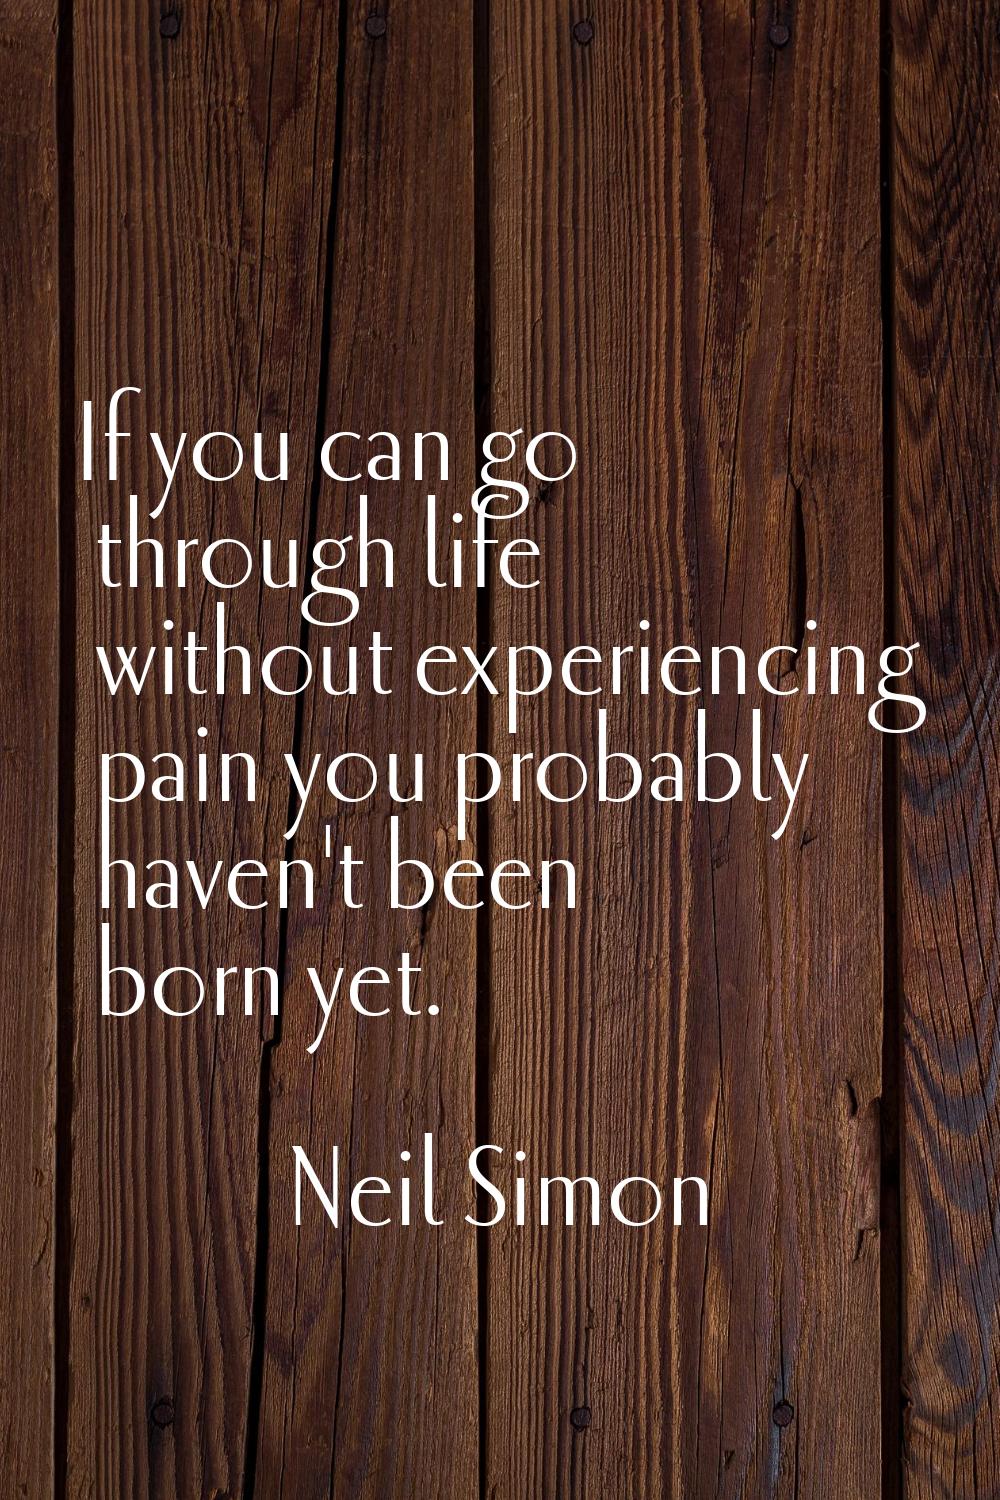 If you can go through life without experiencing pain you probably haven't been born yet.